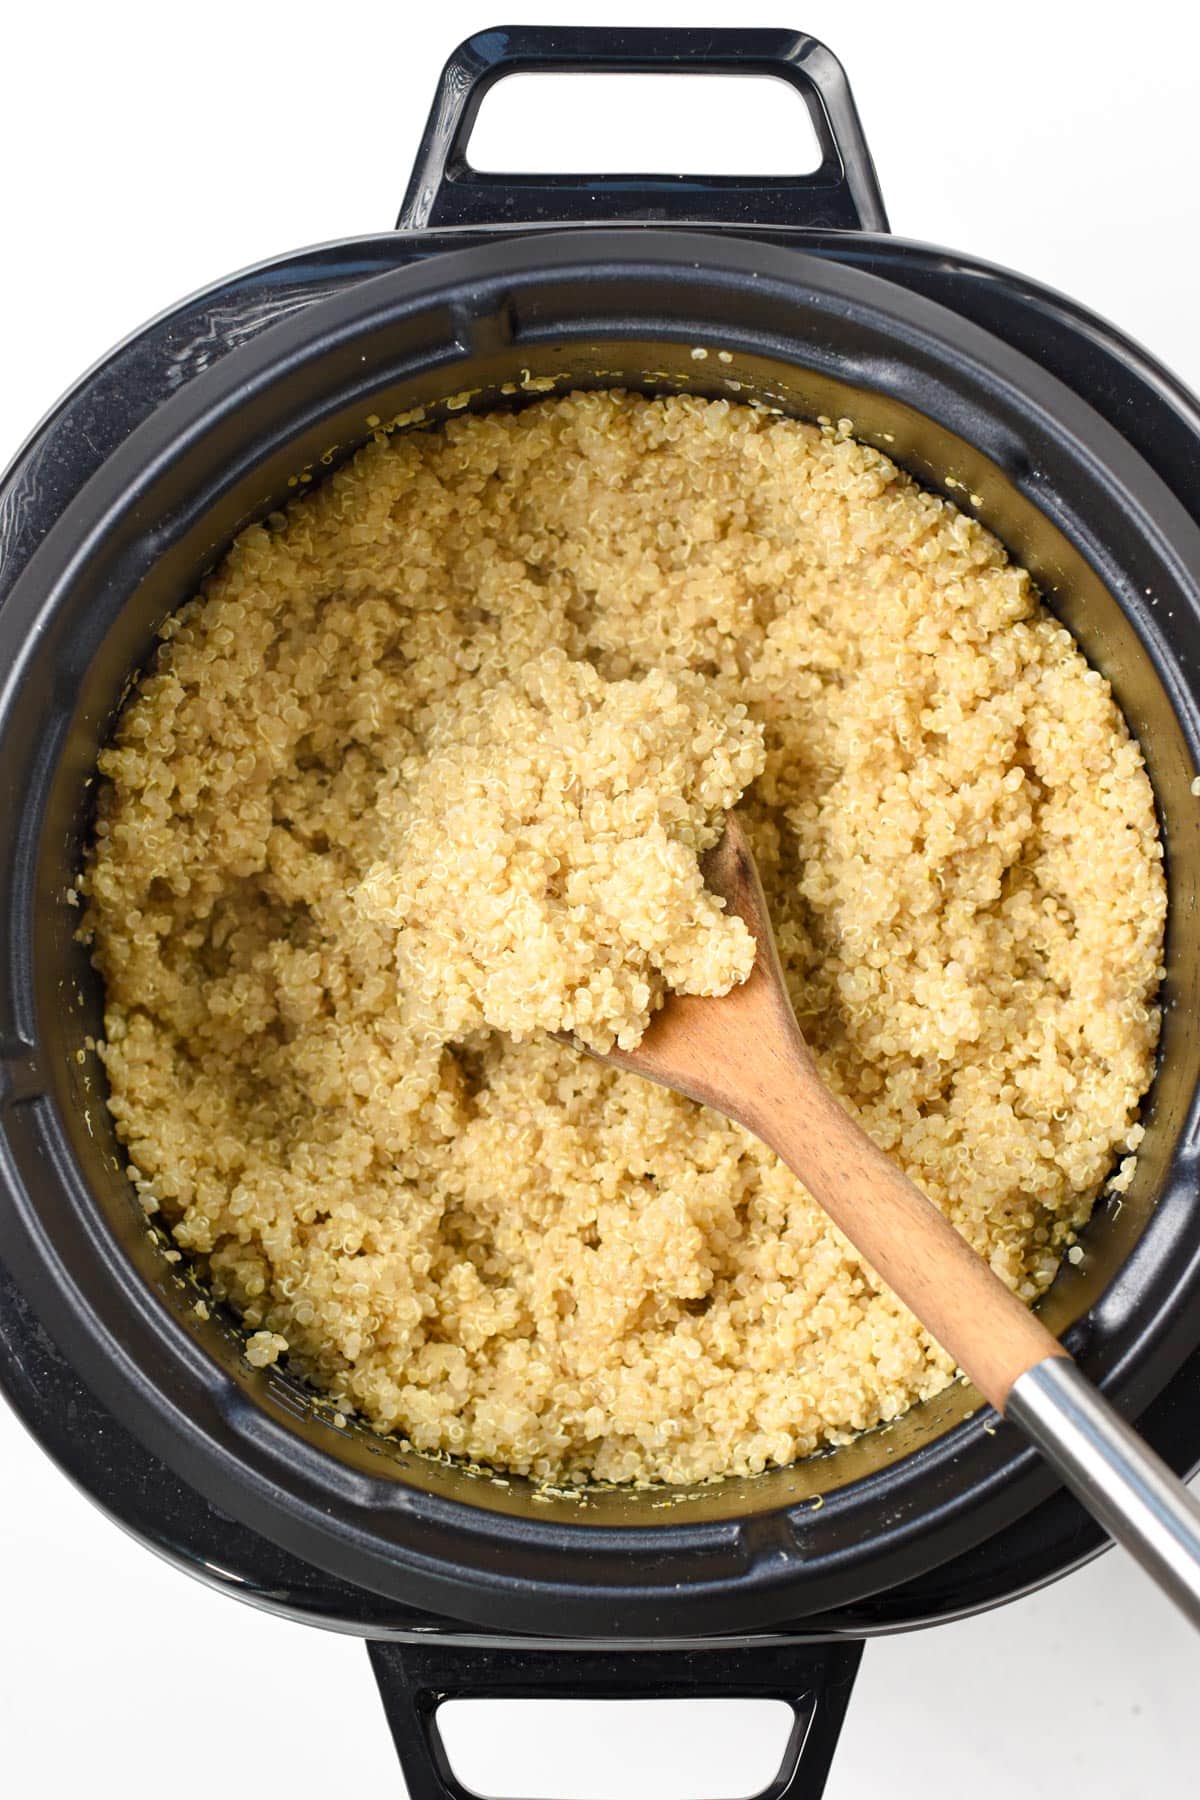 https://www.theconsciousplantkitchen.com/wp-content/uploads/2022/07/how-to-cook-quinoa-in-a-rice-cooker-10.jpg